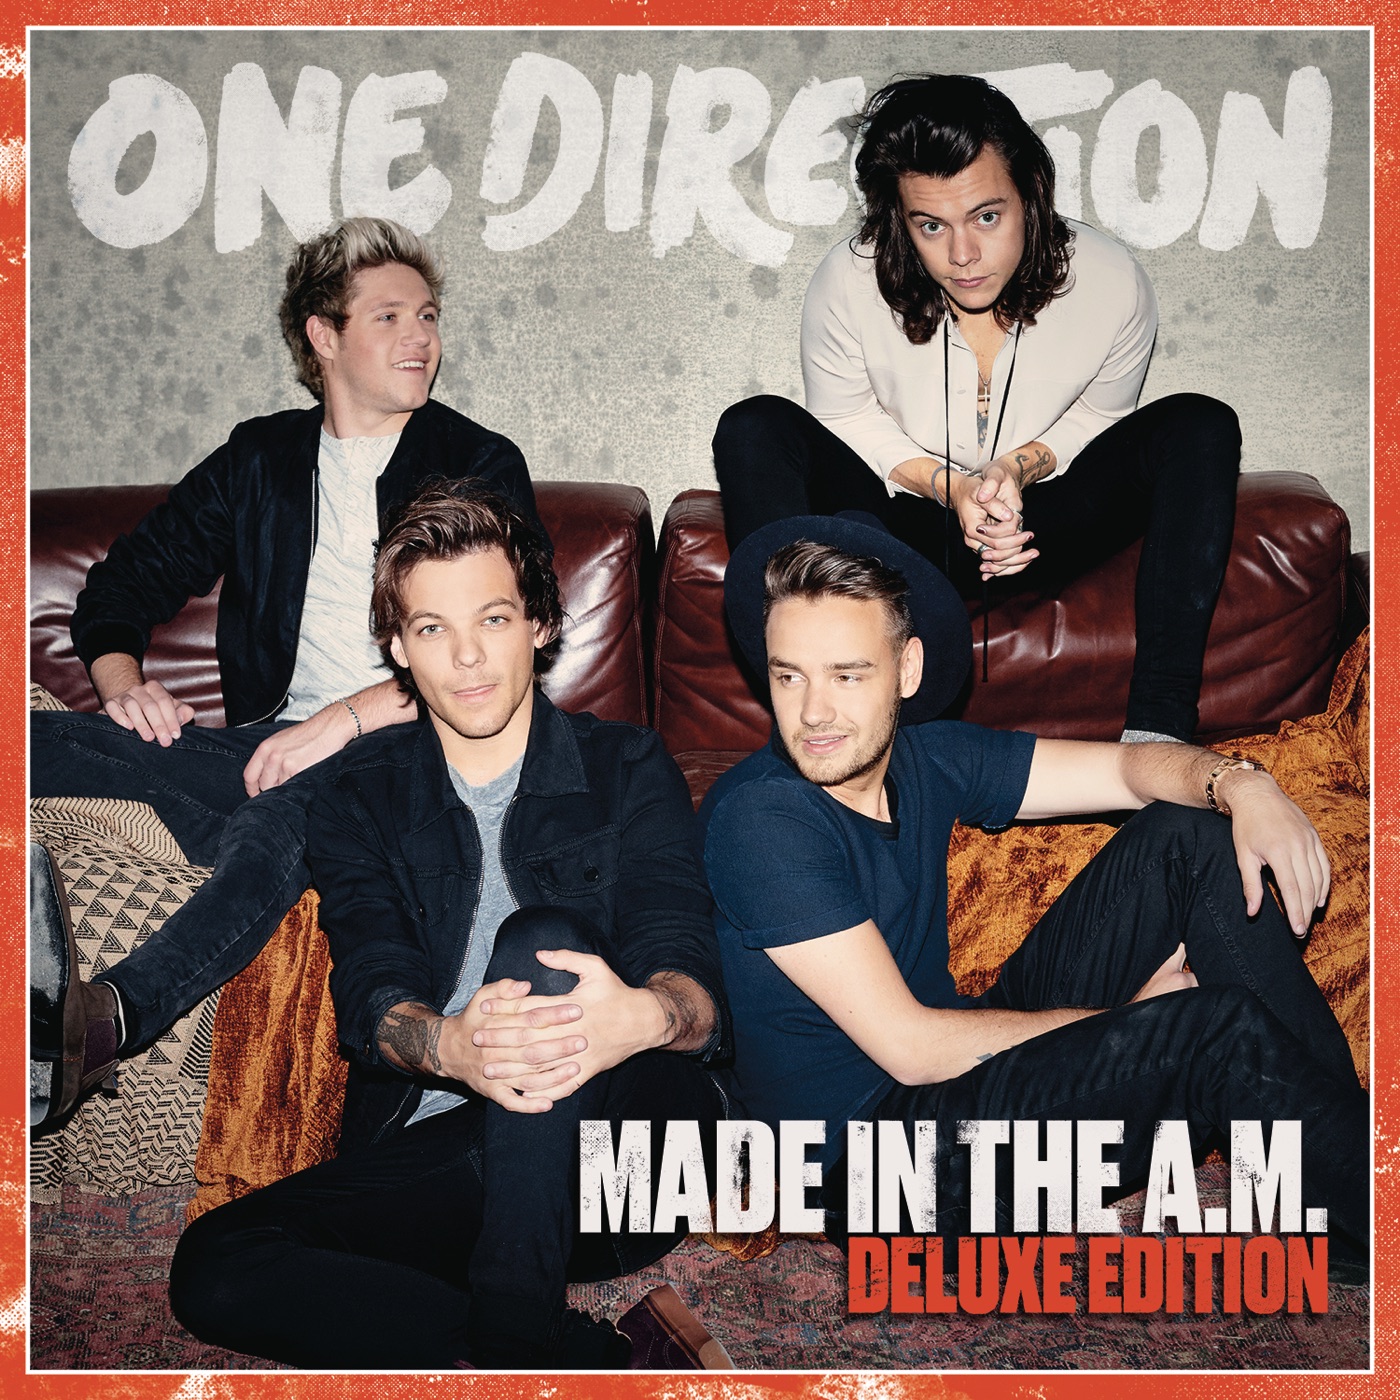 Made In The A.M by One Direction